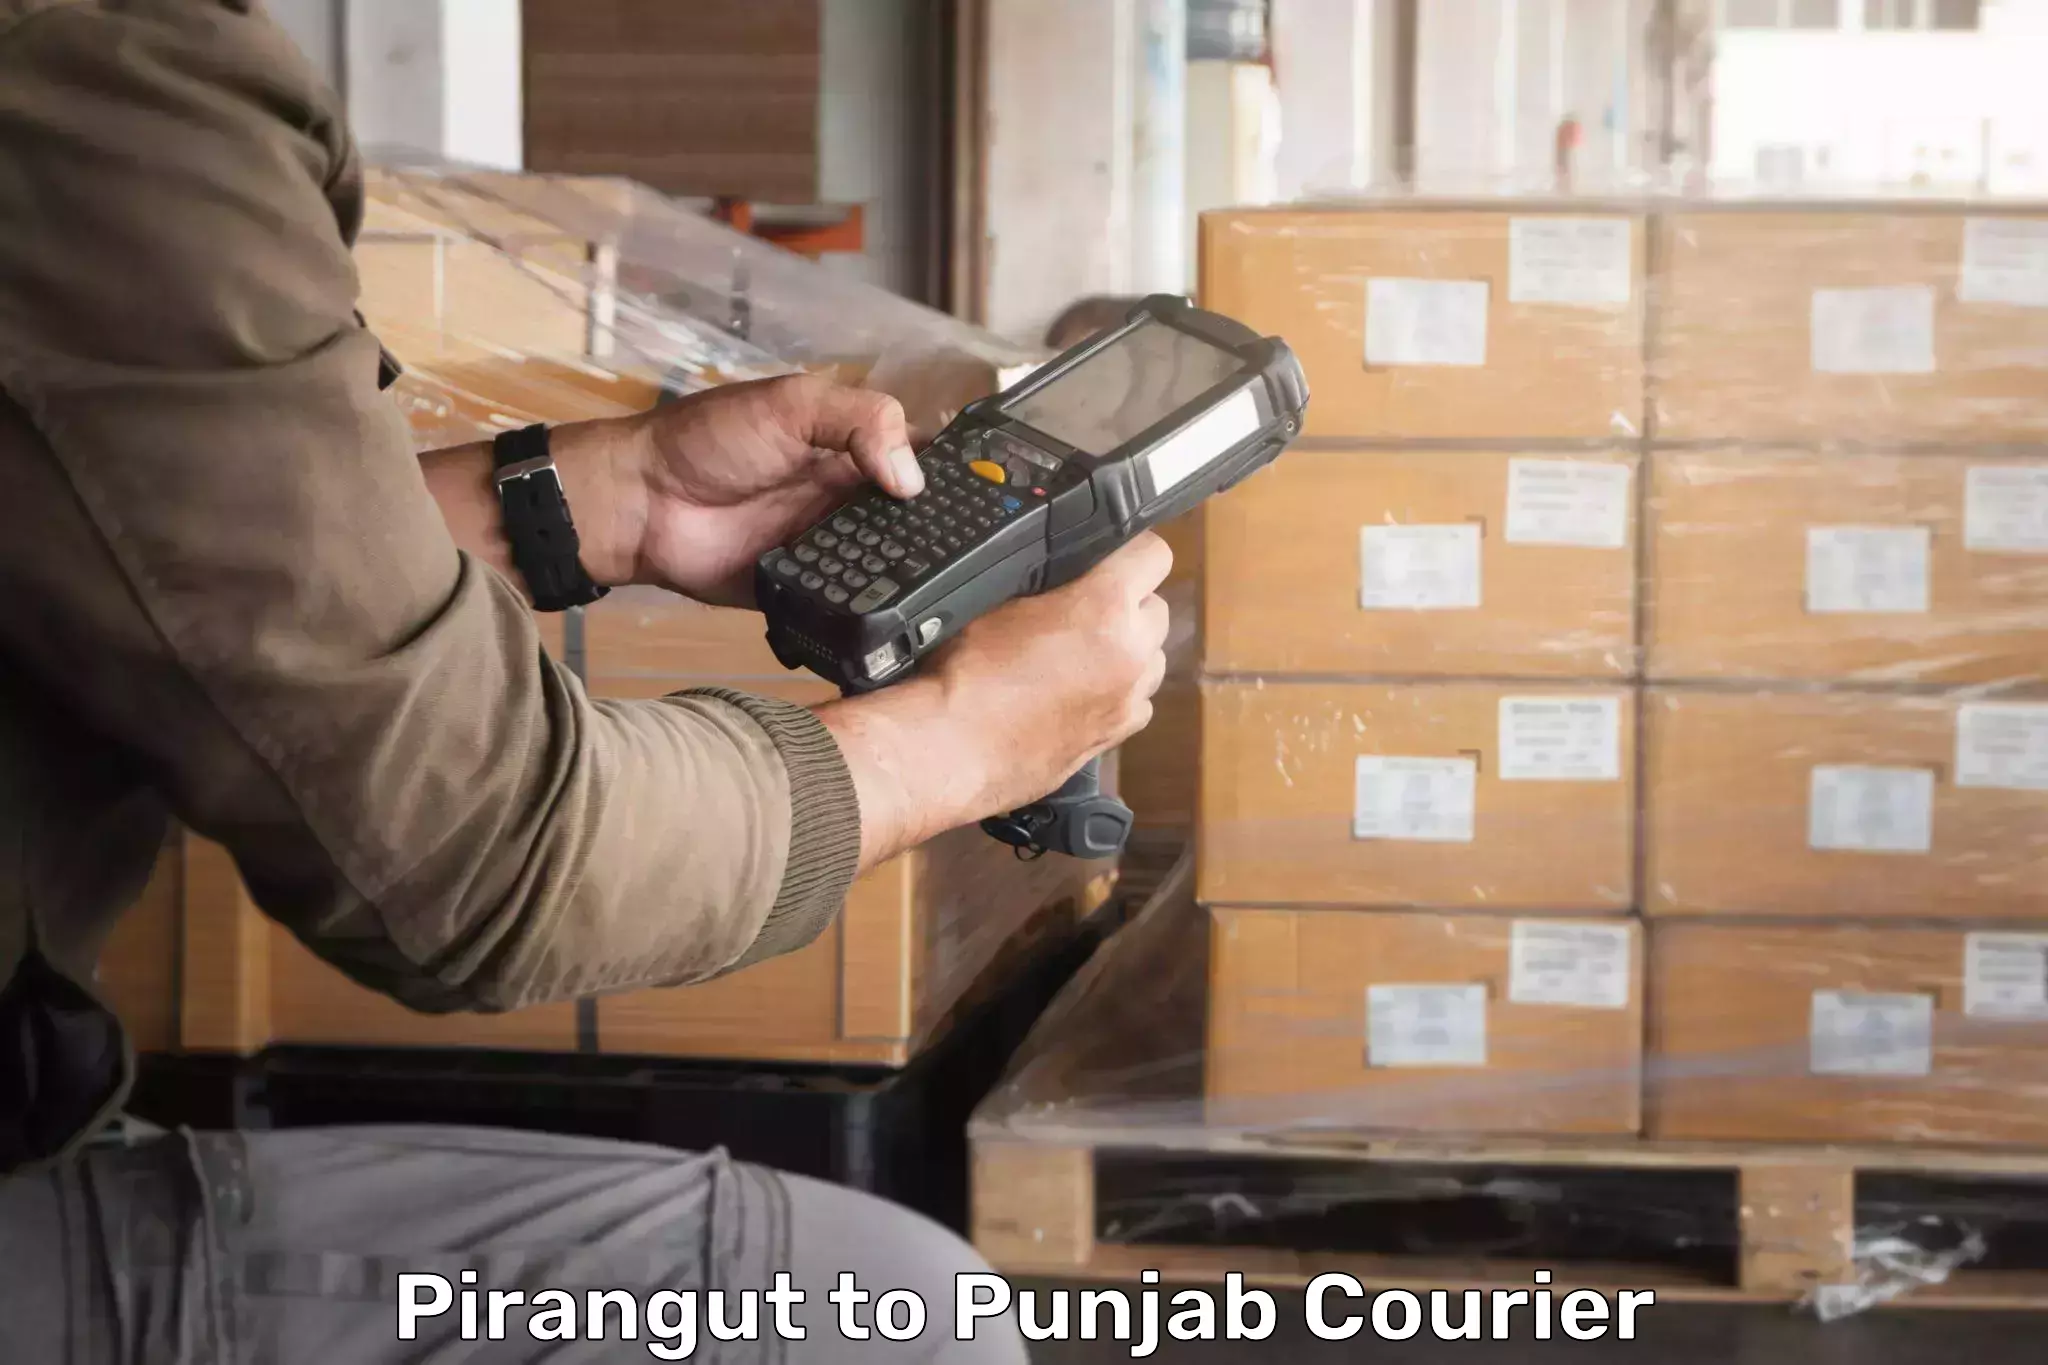 Advanced package delivery Pirangut to Punjab